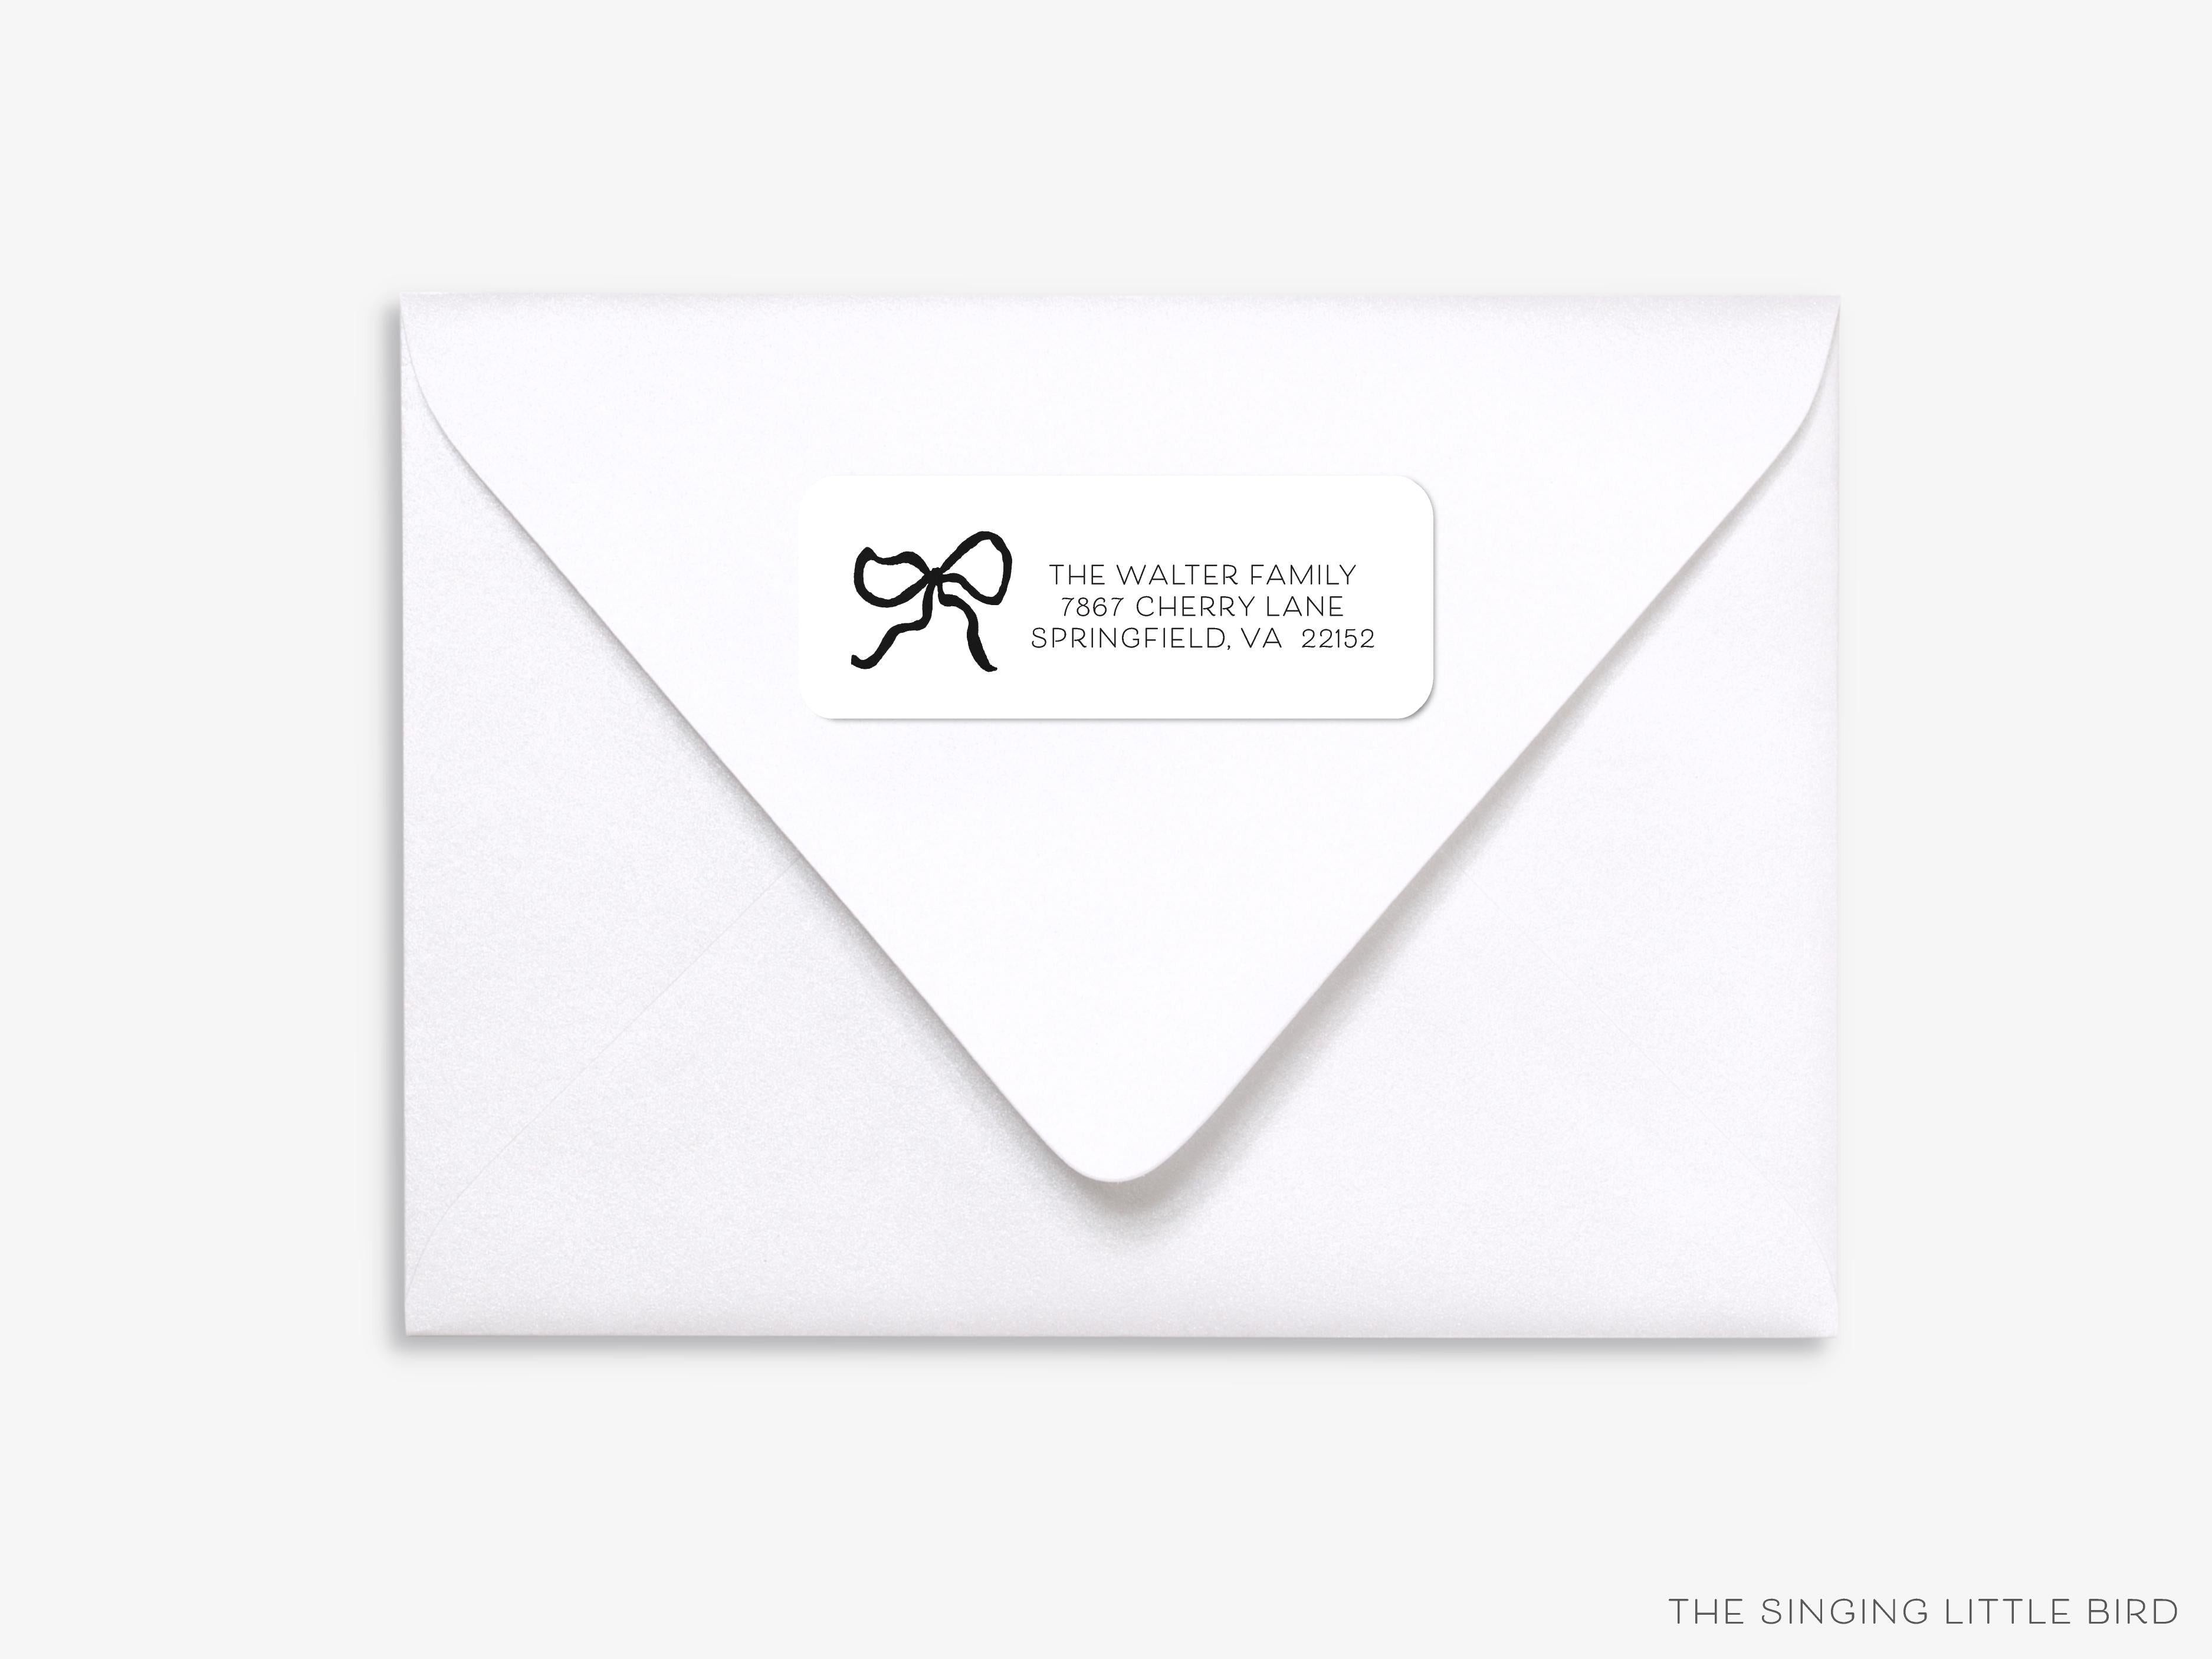 Black Bow Return Address Labels-These personalized return address labels are 2.625" x 1" and feature our hand-painted watercolor bow, printed in the USA on beautiful matte finish labels. These make great gifts for yourself or the bow lover.-The Singing Little Bird